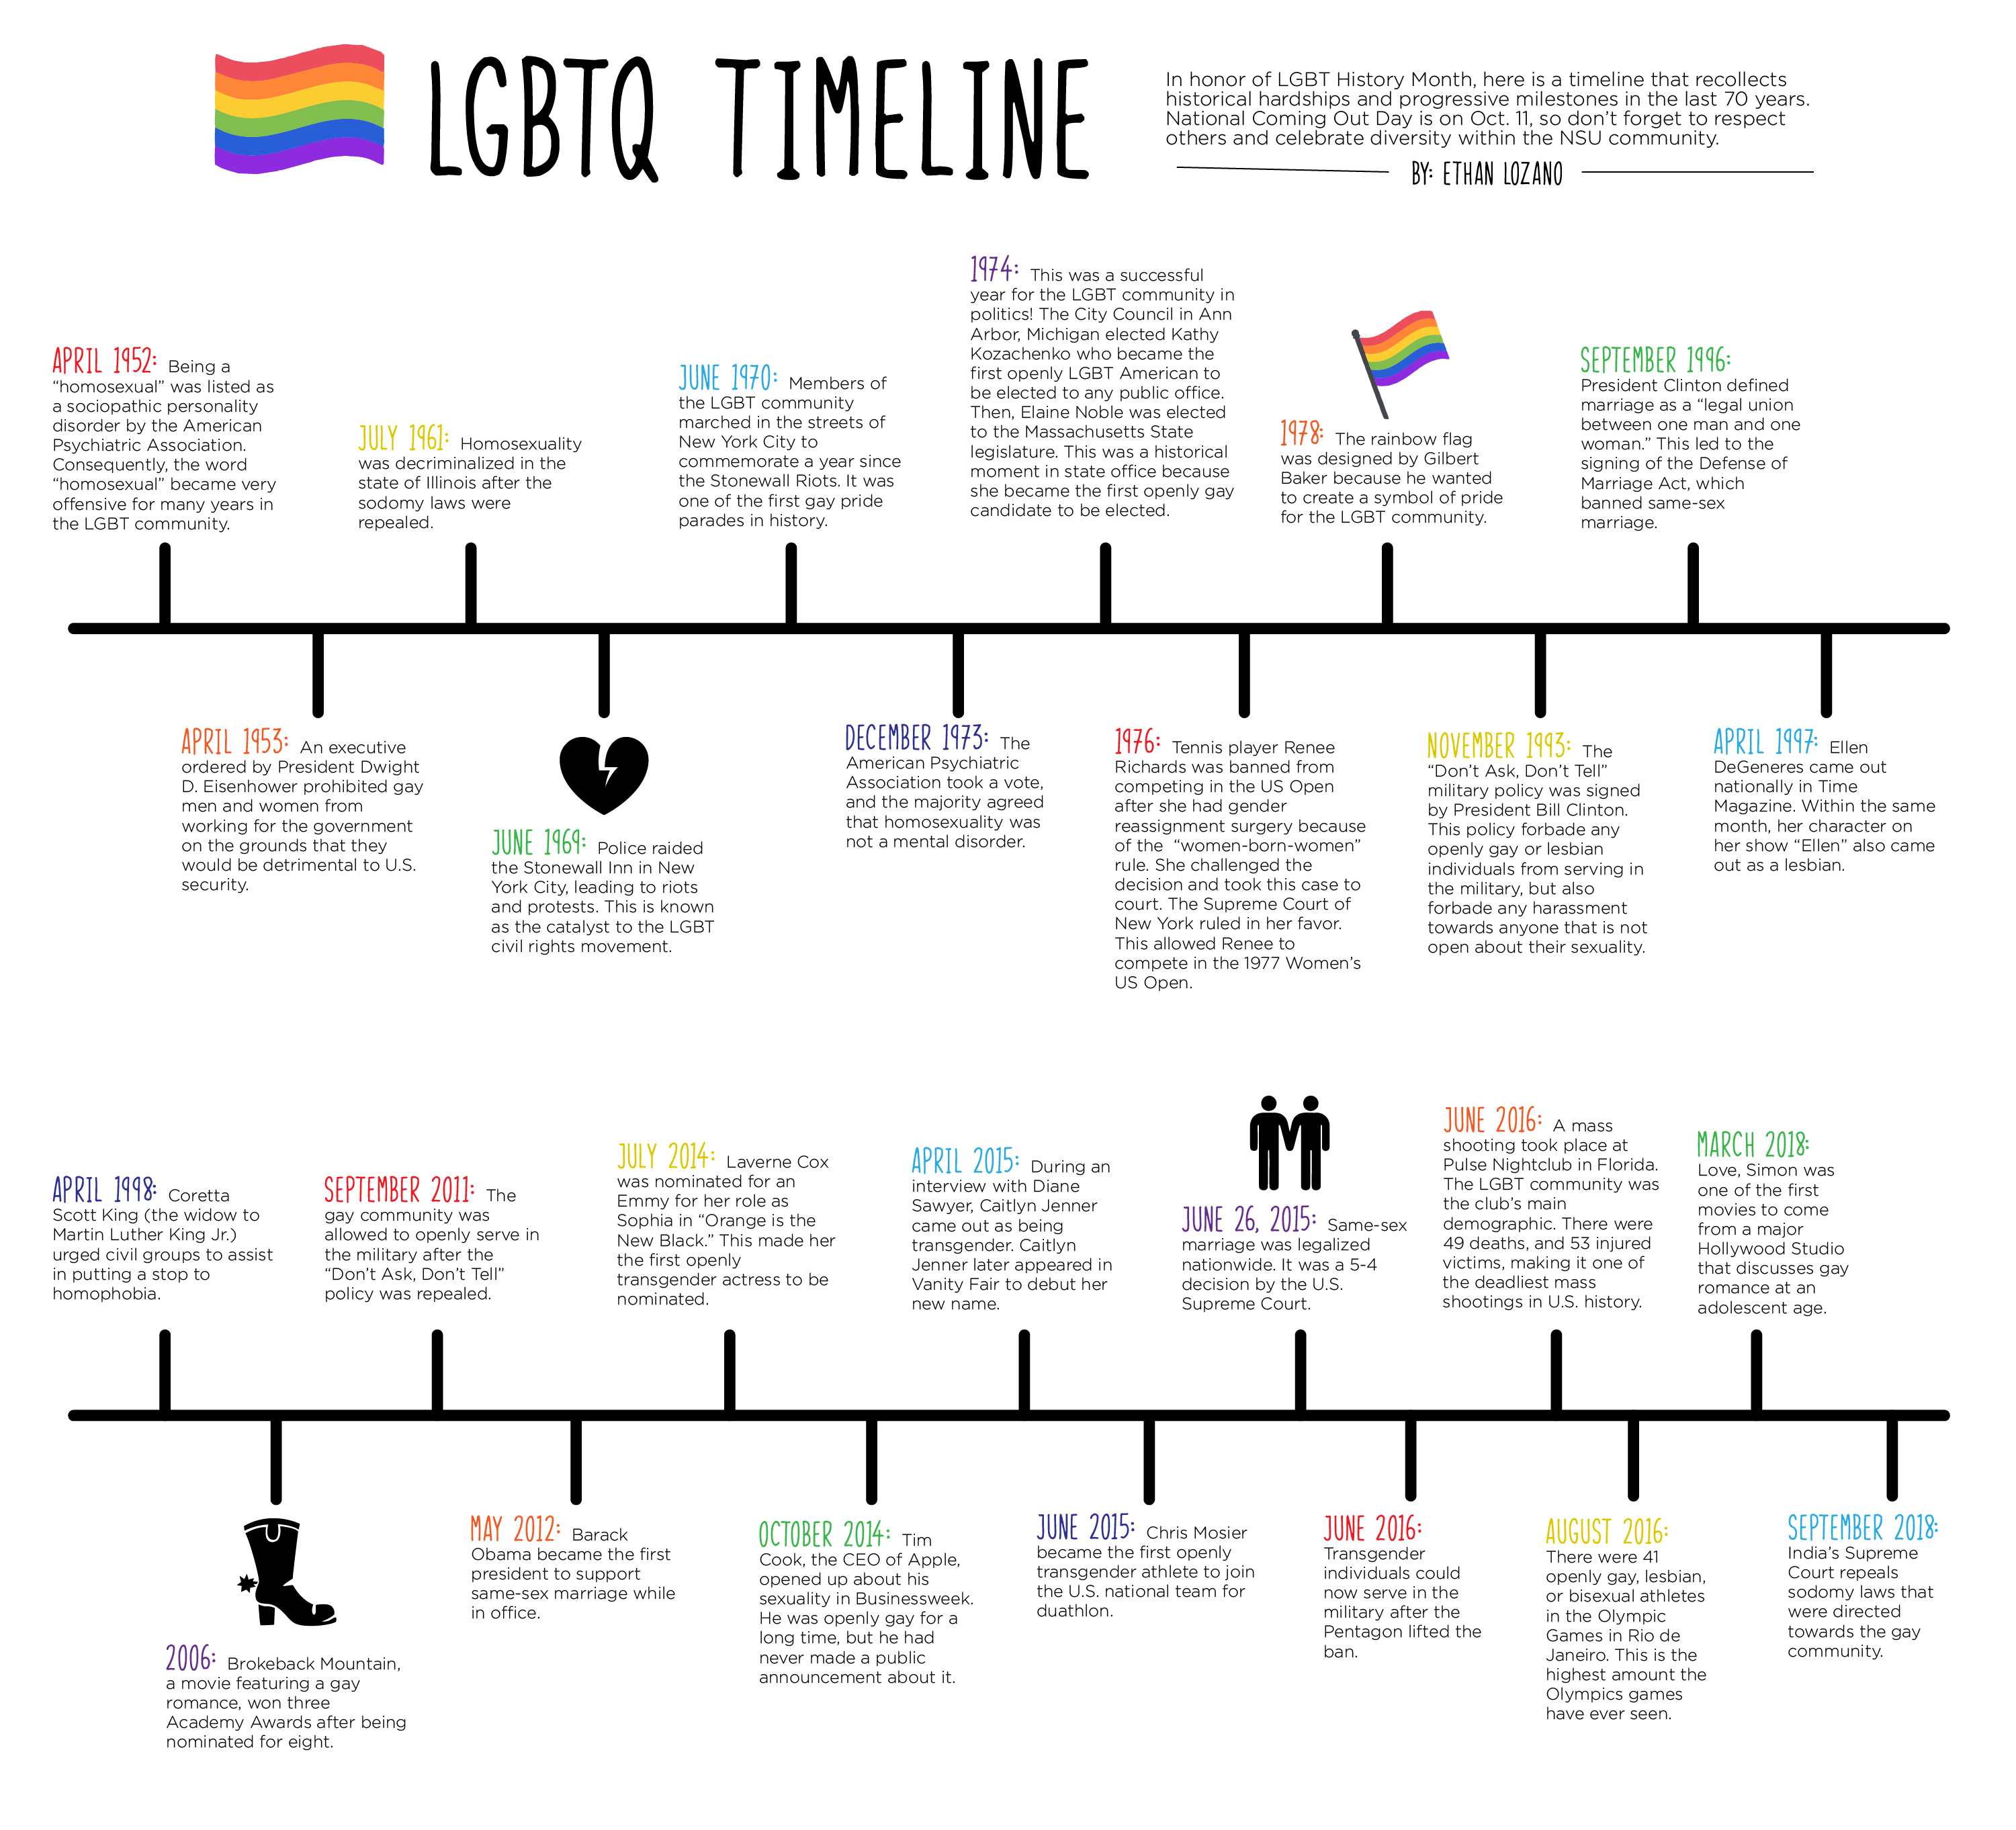 gay rights movement timeline